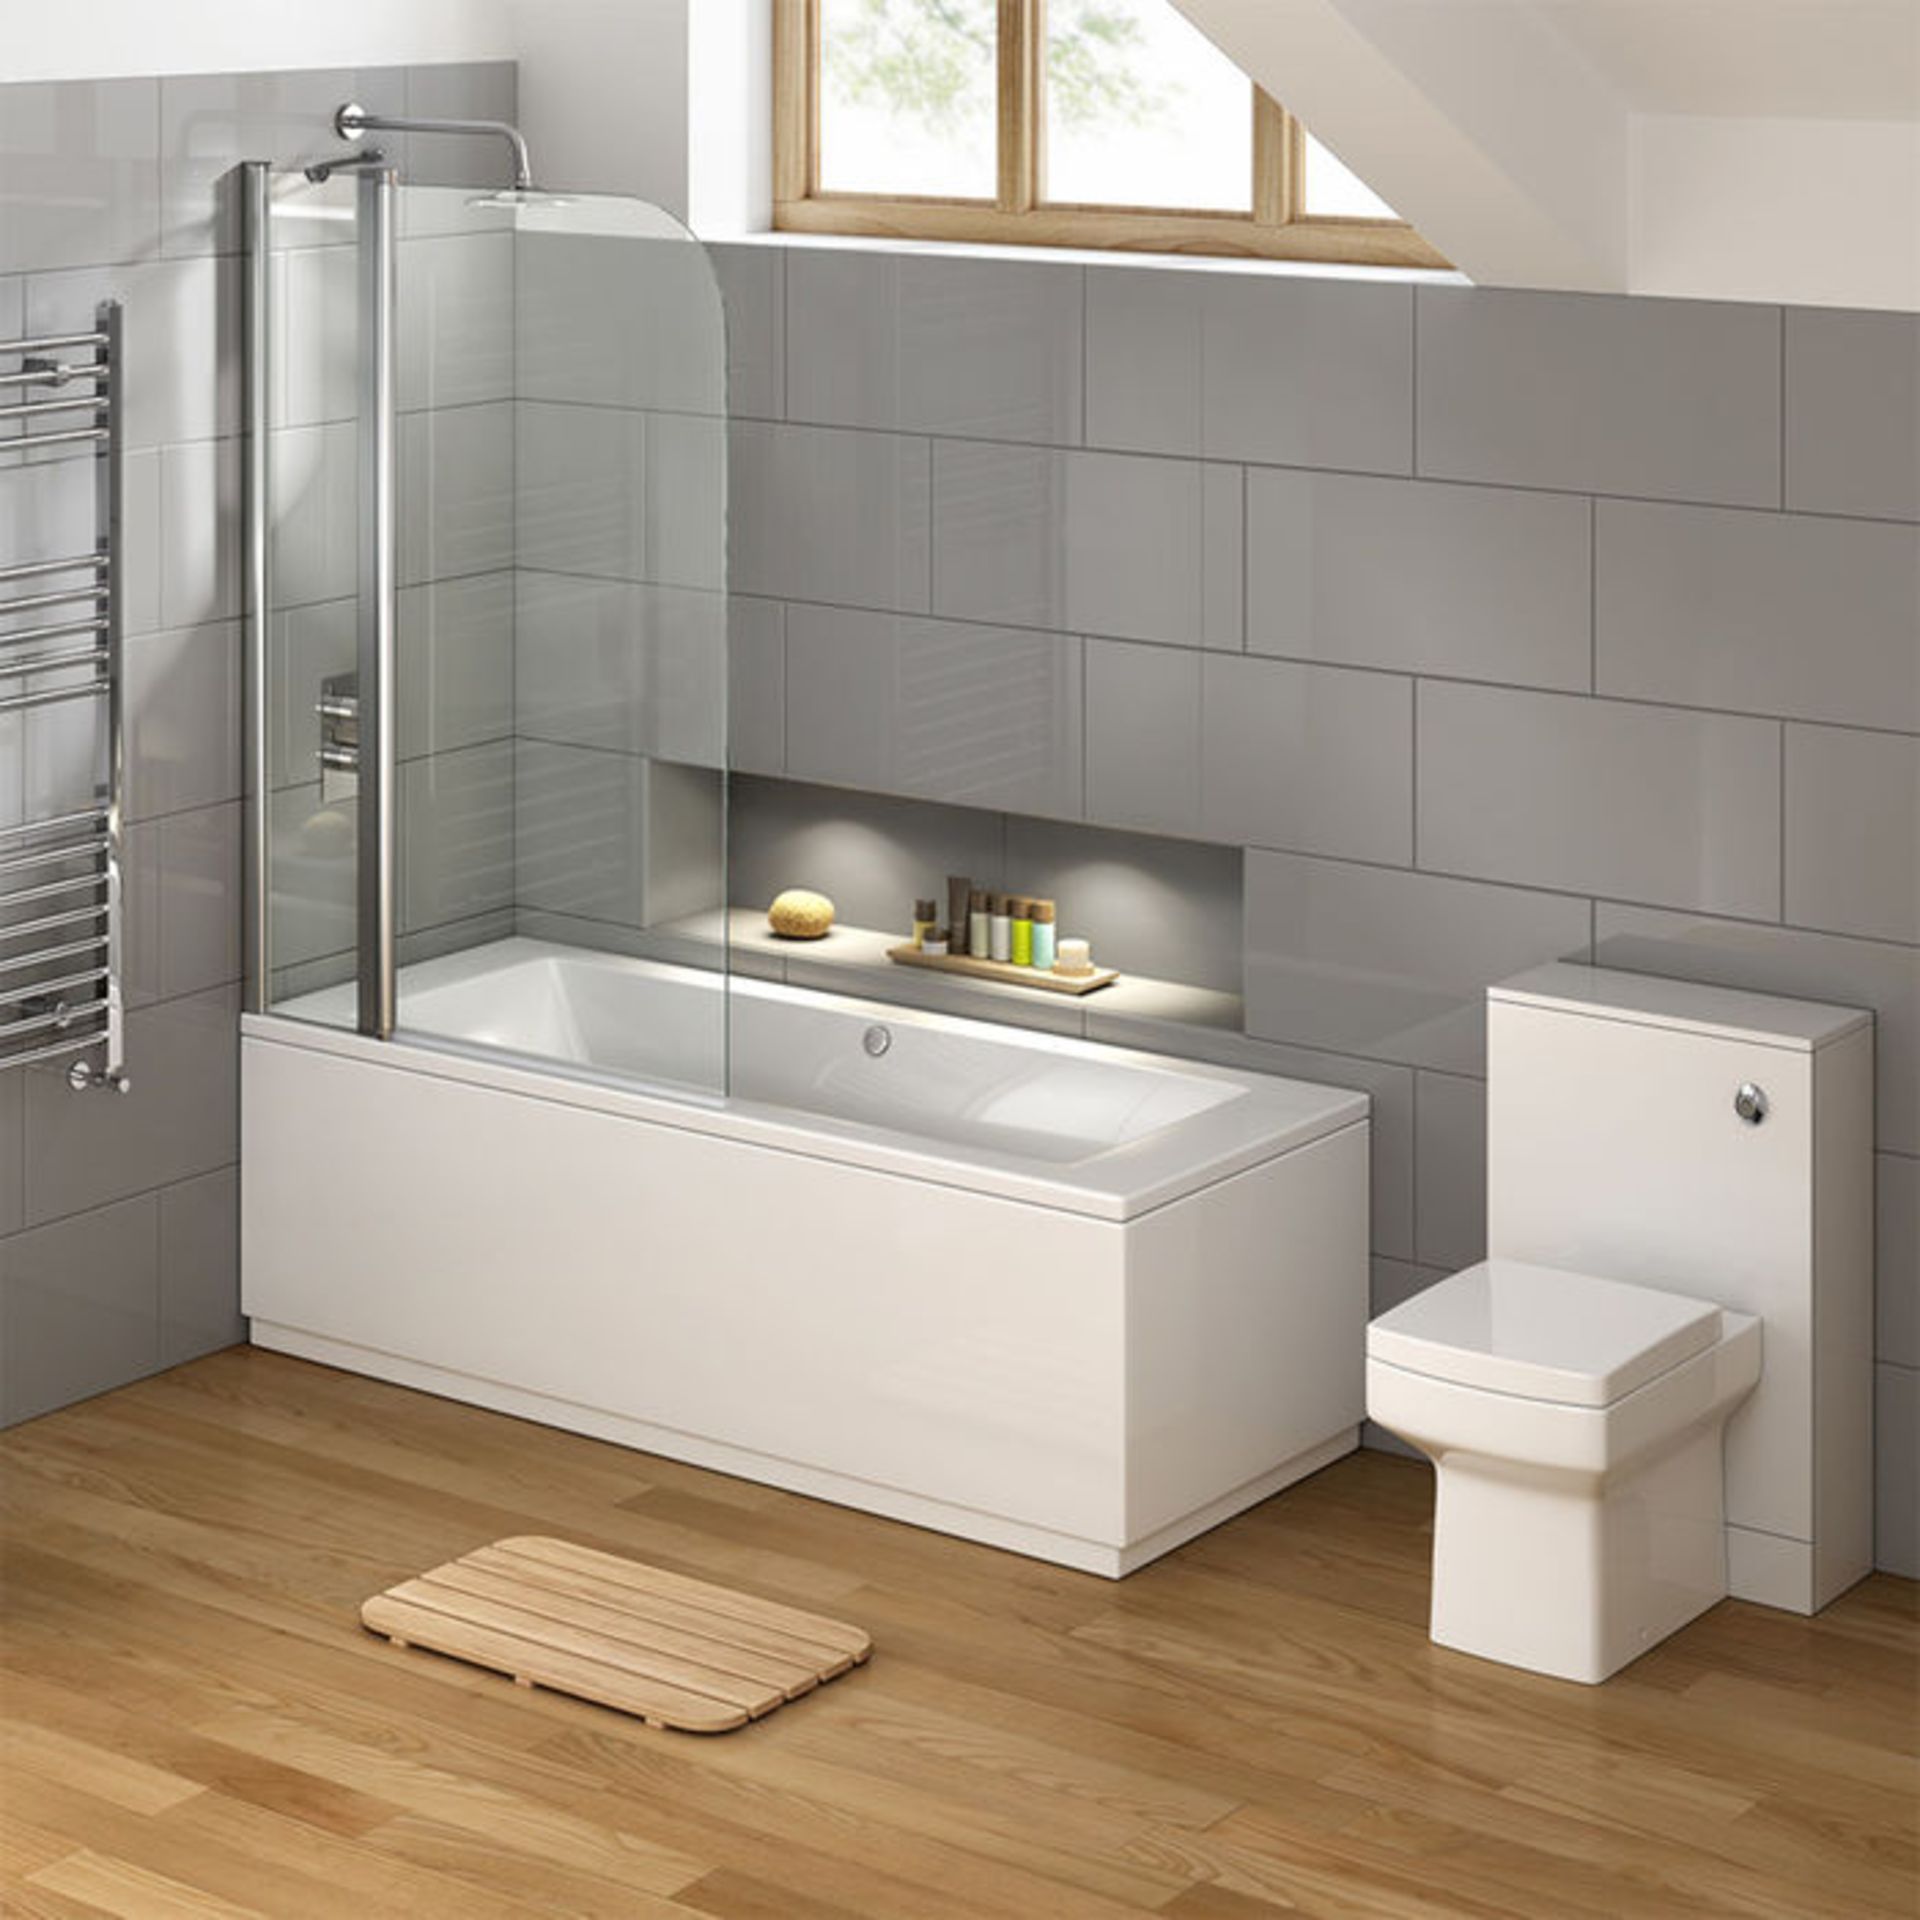 (P26) 1000mm - 6mm - EasyClean Straight Bath Screen. RRP £224.99. 6mm Tempered Safety Glass Screen - - Image 3 of 4